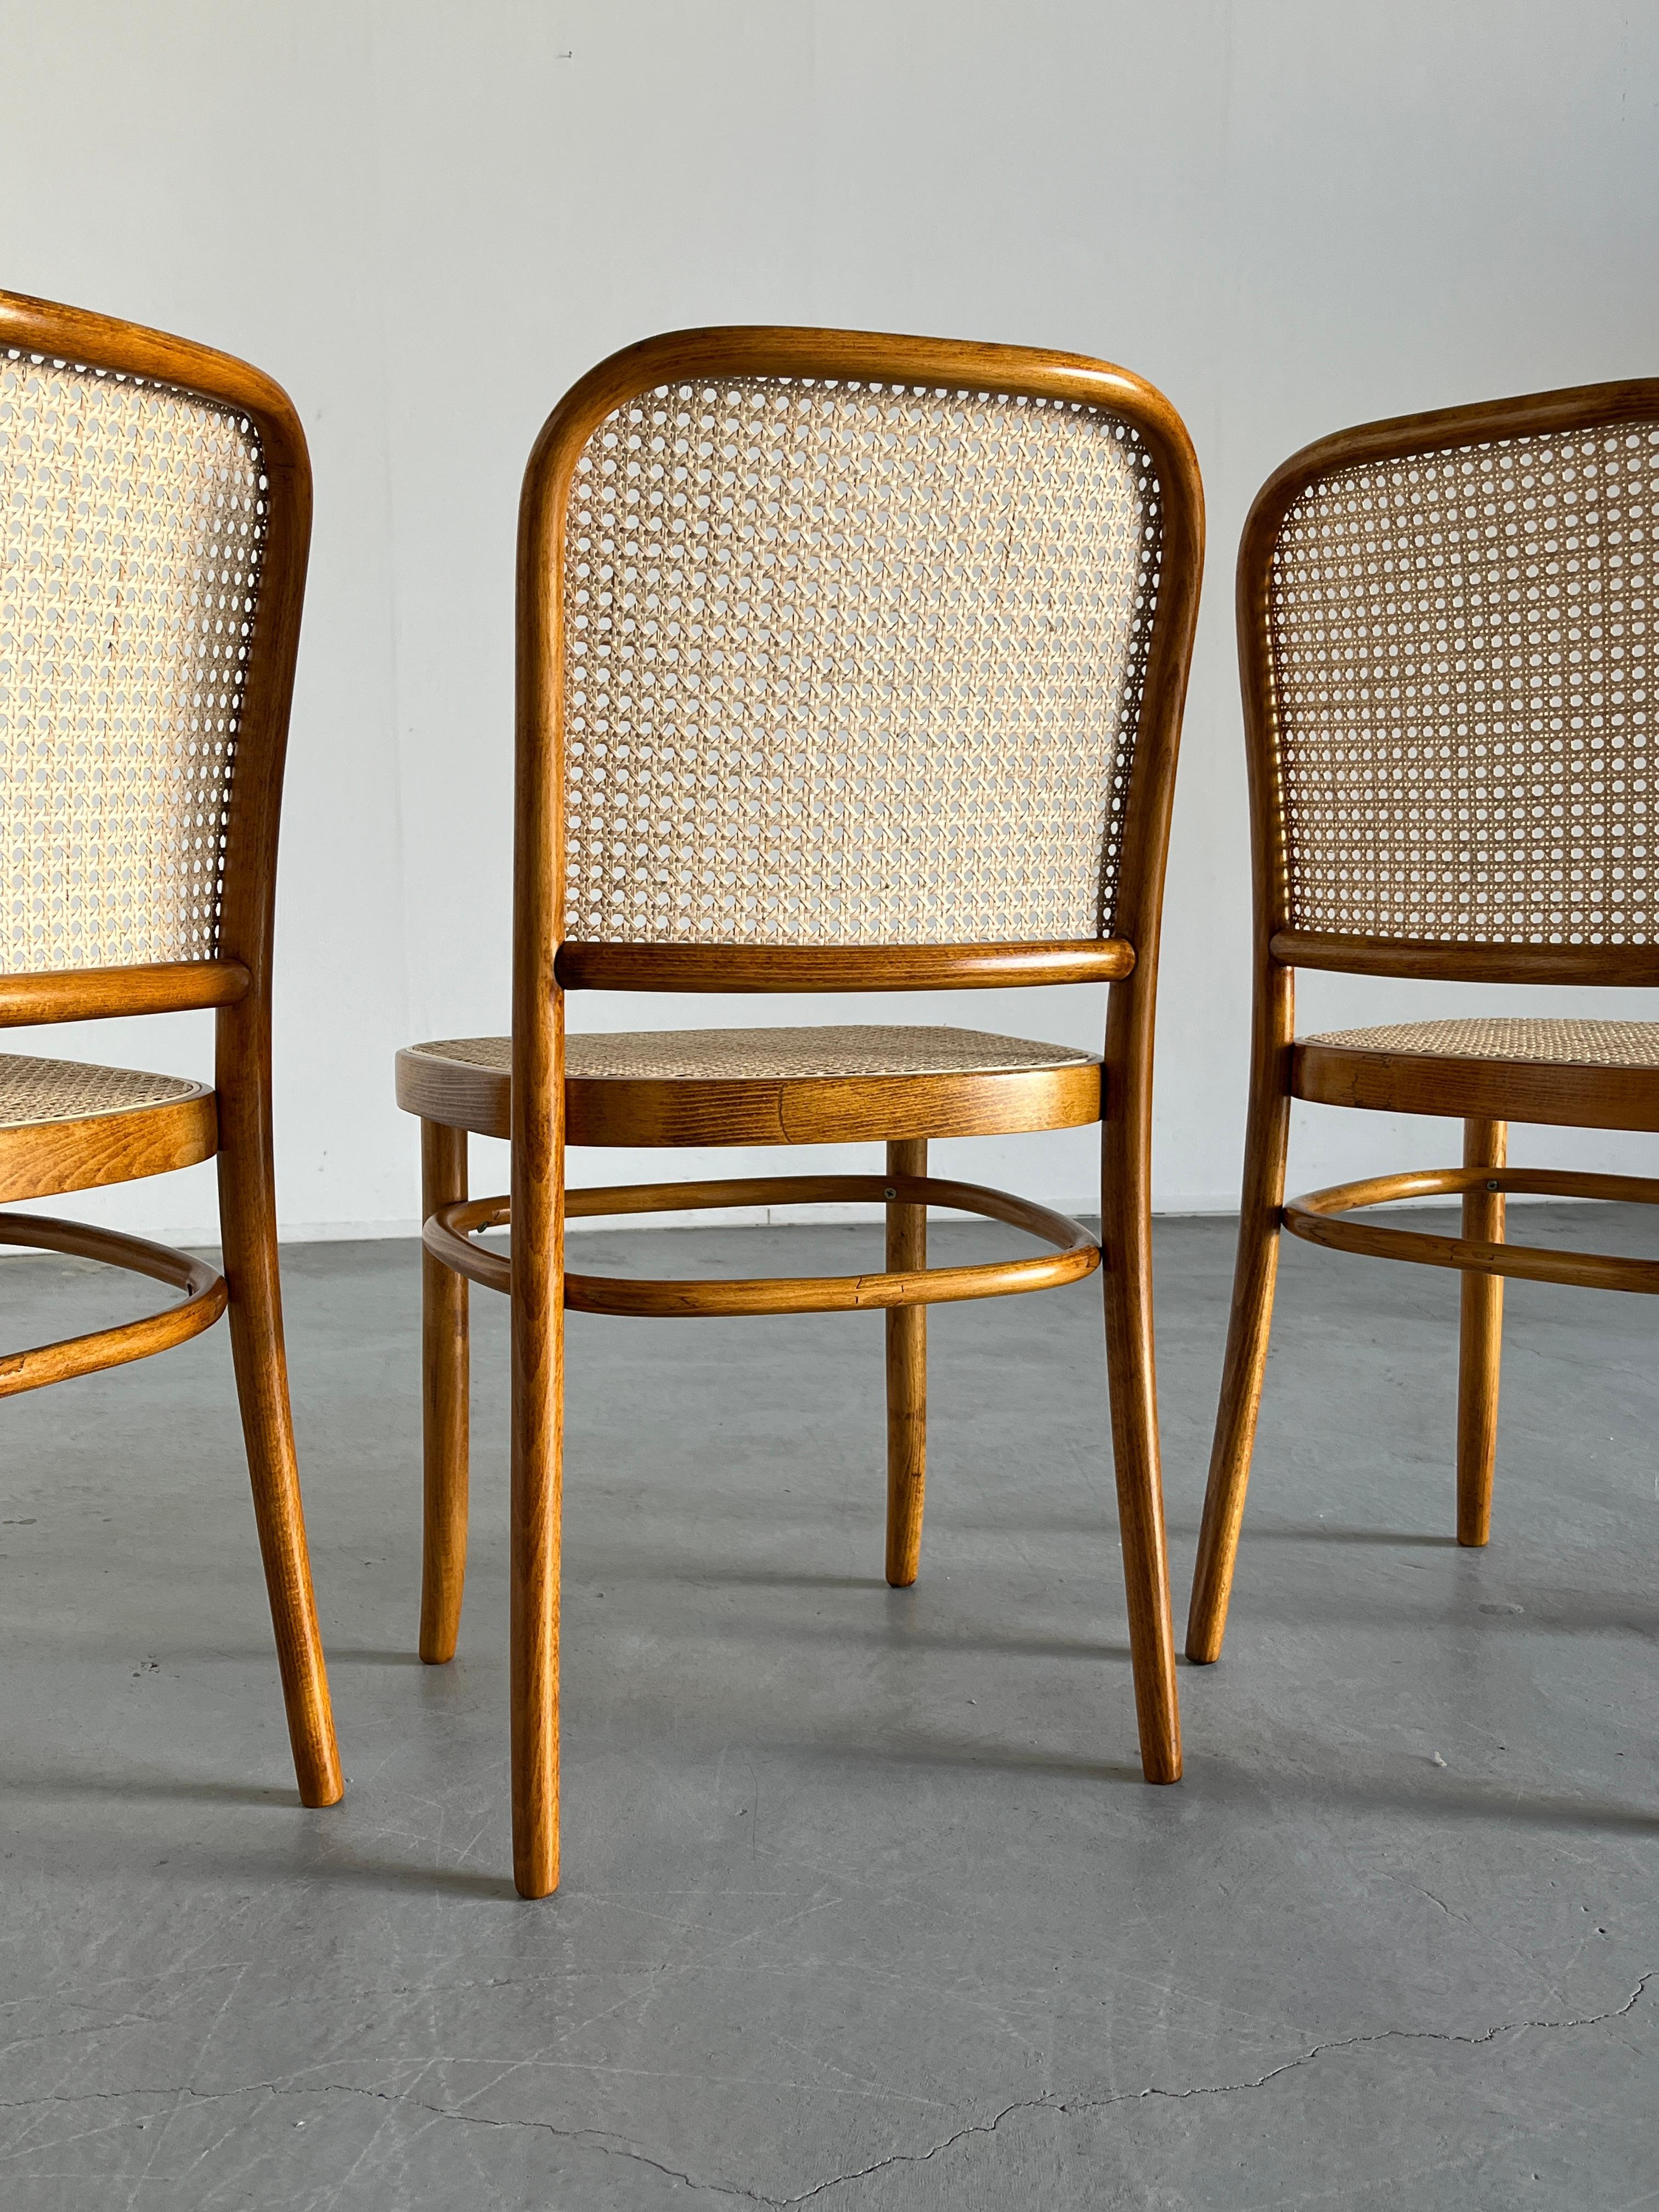 Cane 1 of 12 Vintage Thonet Bentwood Prague Chairs by Josef Hoffman, 1970s, Restored For Sale